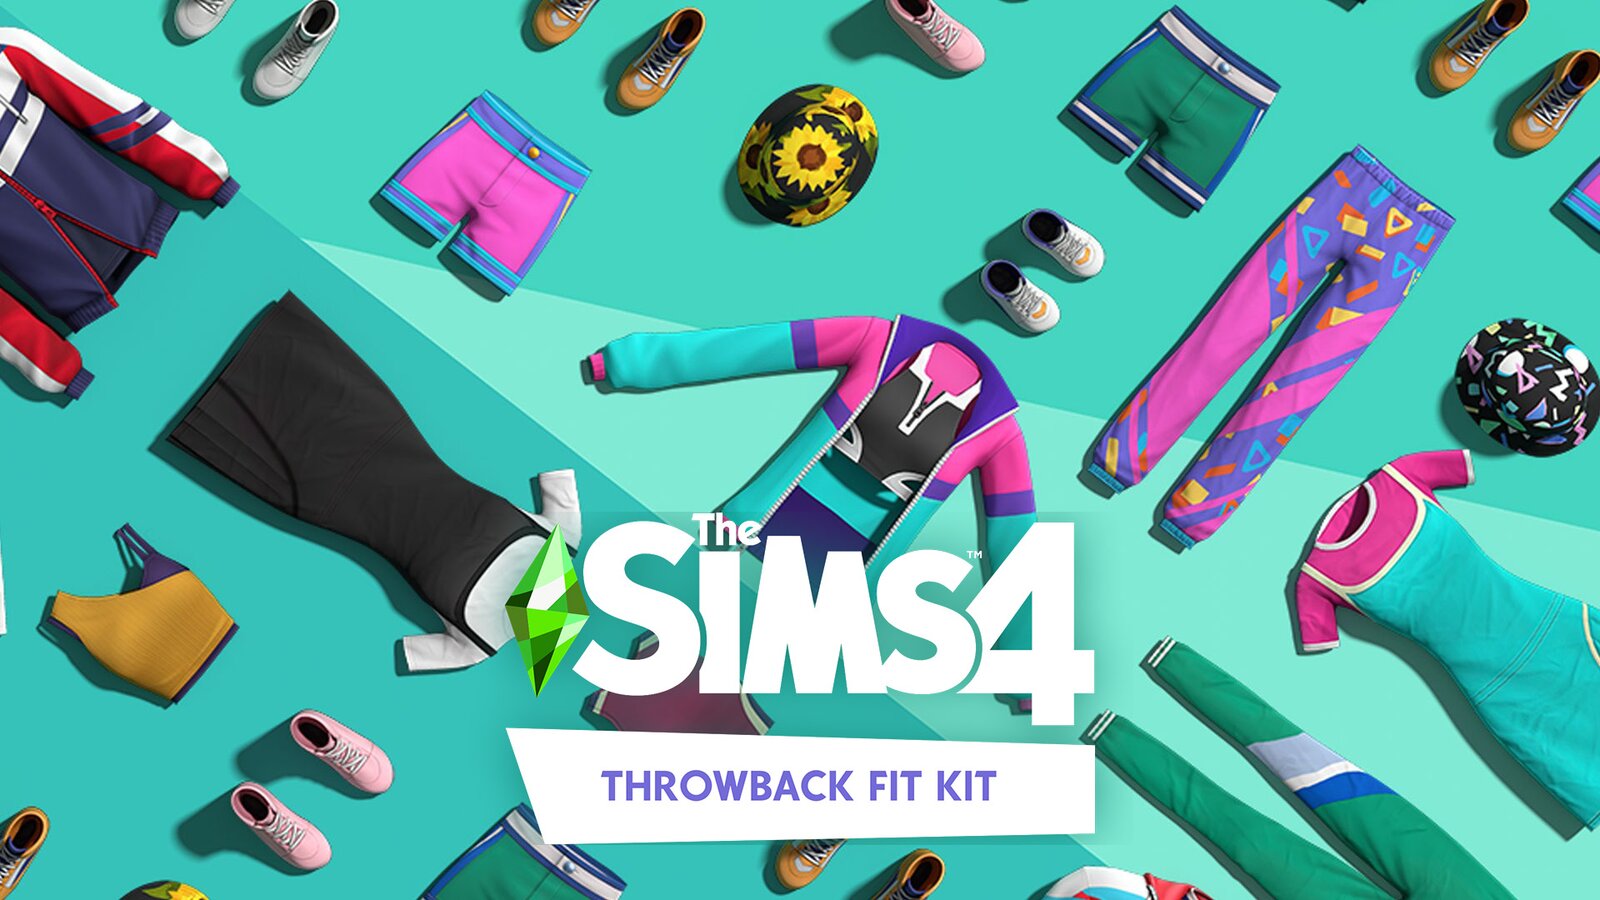 The Sims 4: Throwback Fit Kit